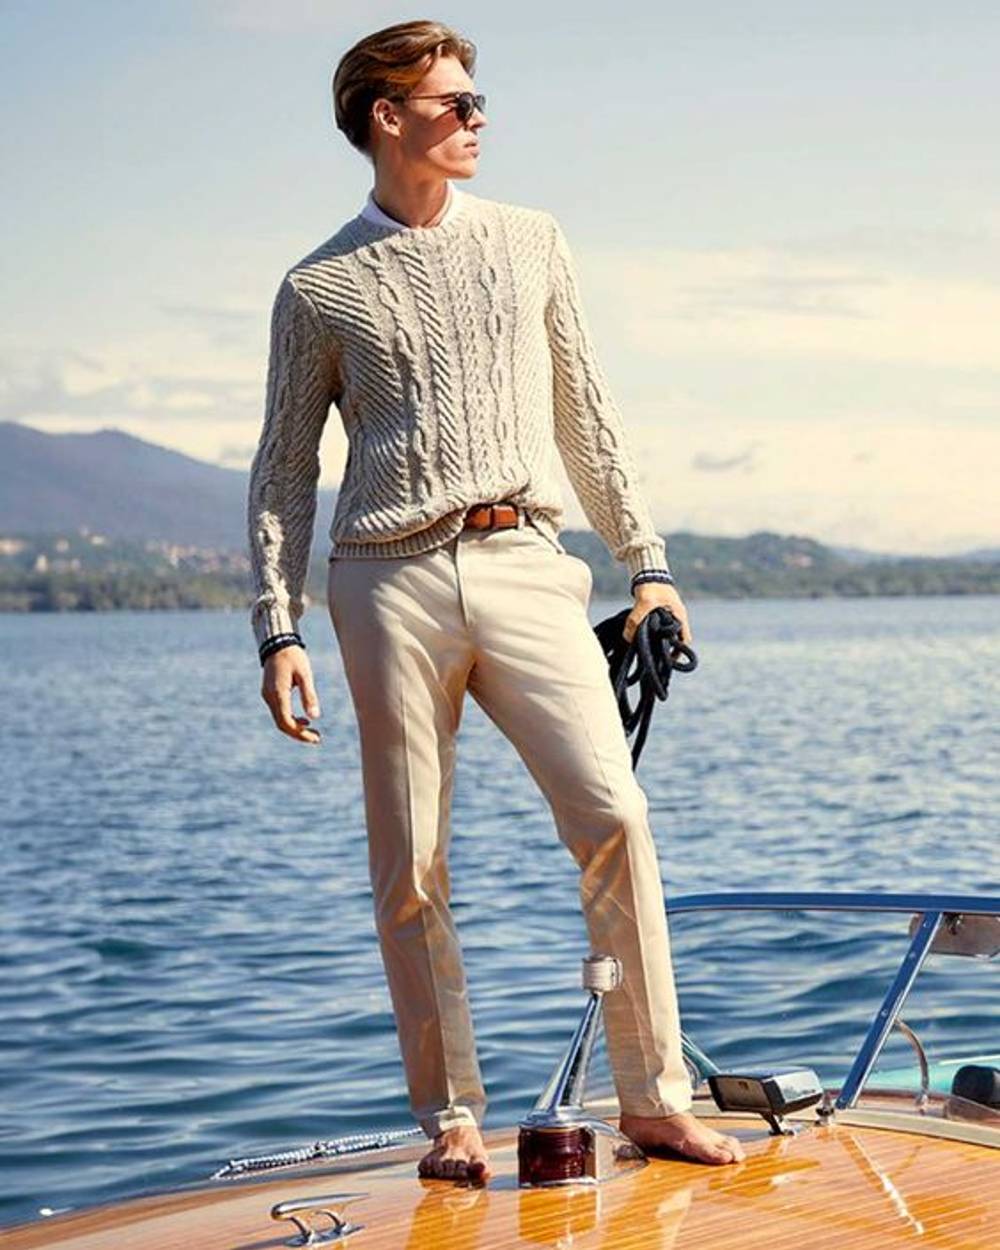 Old money style men nautical boating look